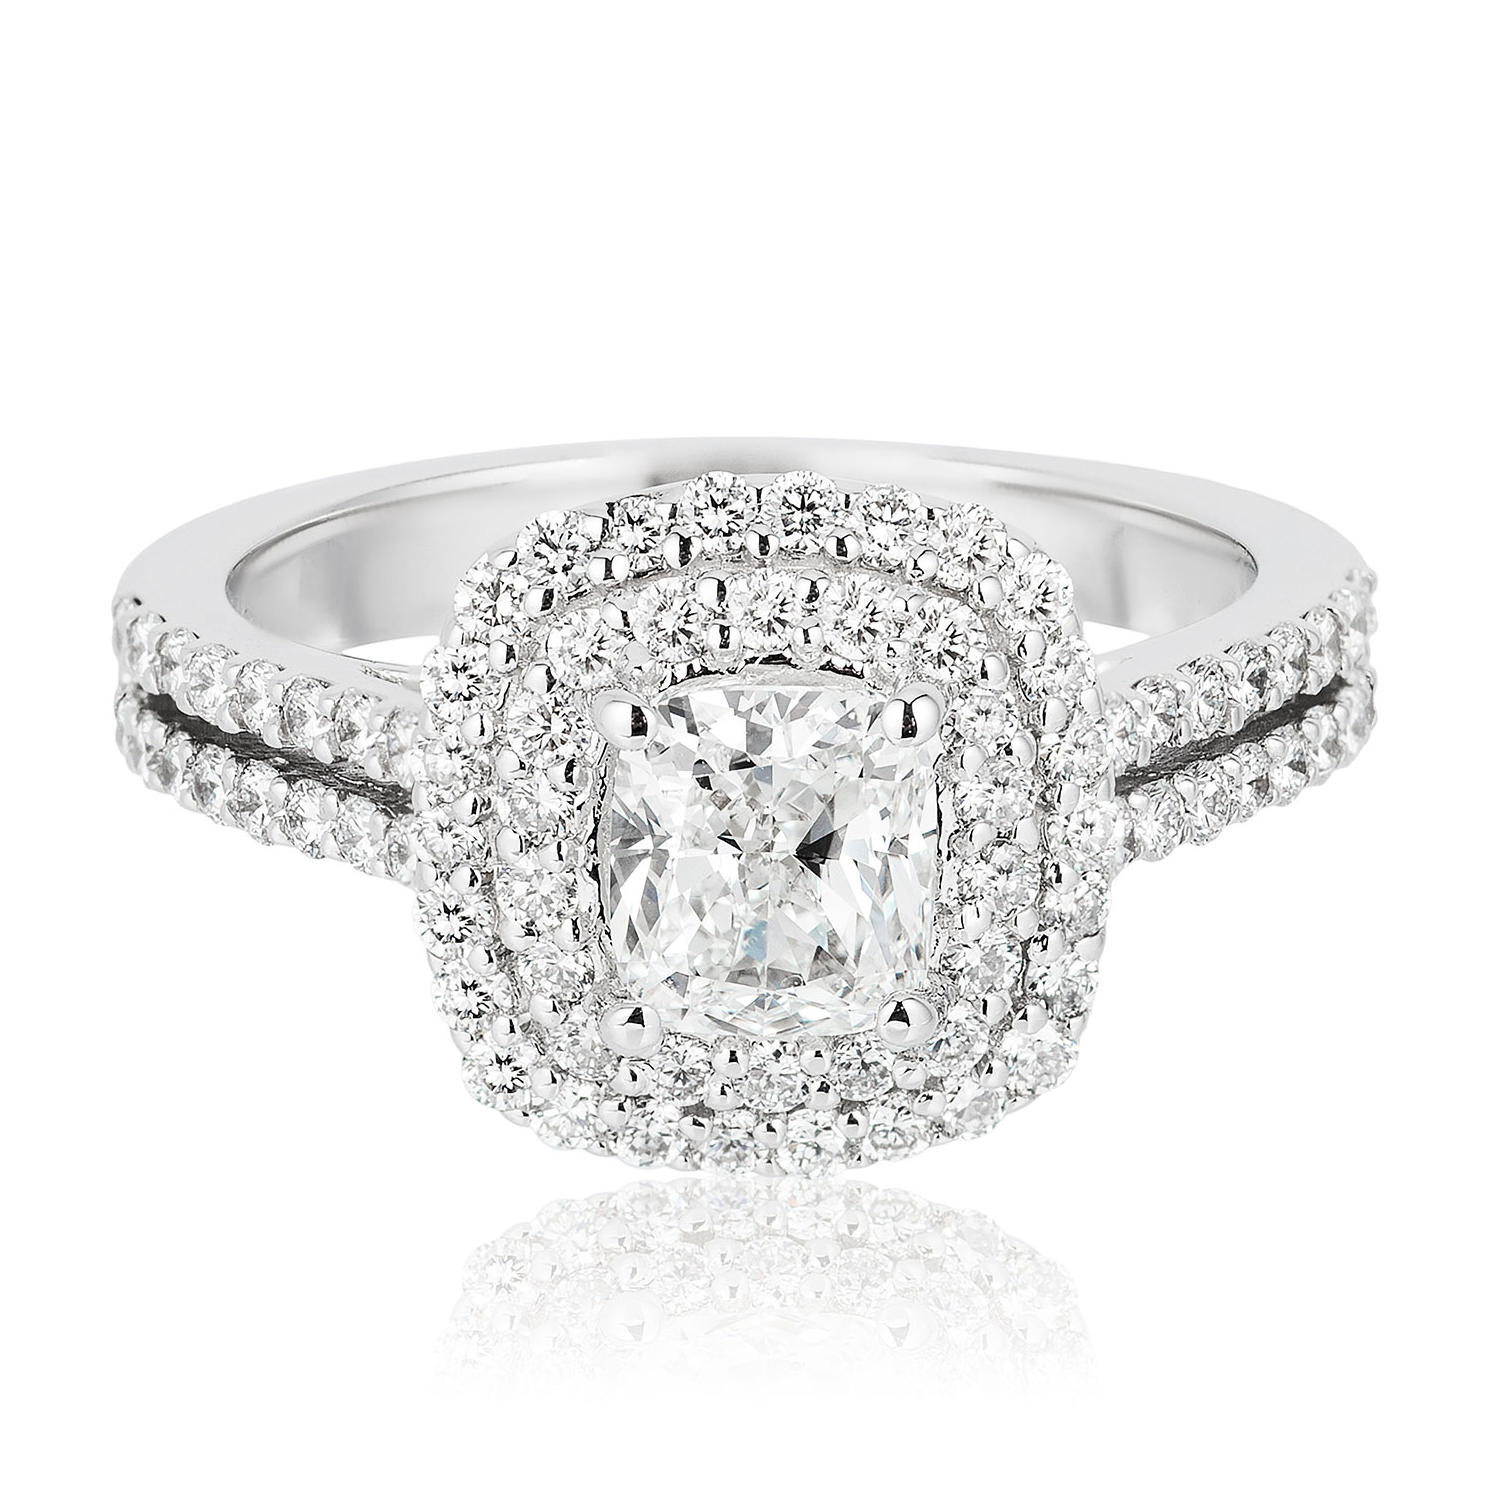 Superior Quality Collection 1.73 CT. T.W. Cushion Shaped Diamond Engagement Ring in 18K White Gold (I, VS2) 4.5